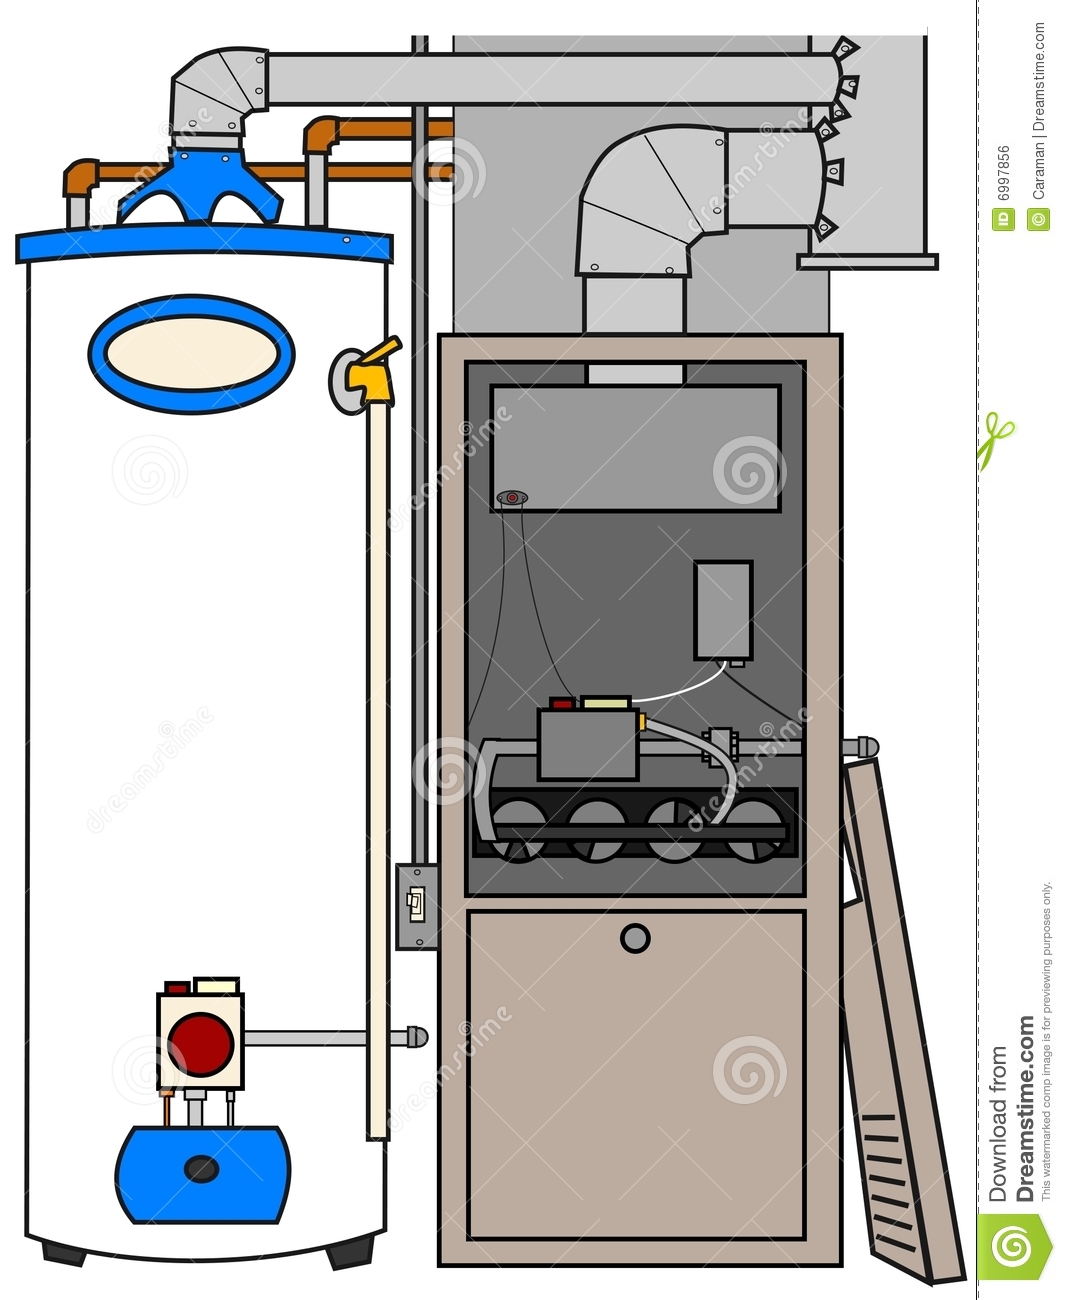 Furnace And Water Heater Royalty Free Stock Image   Image  6997856